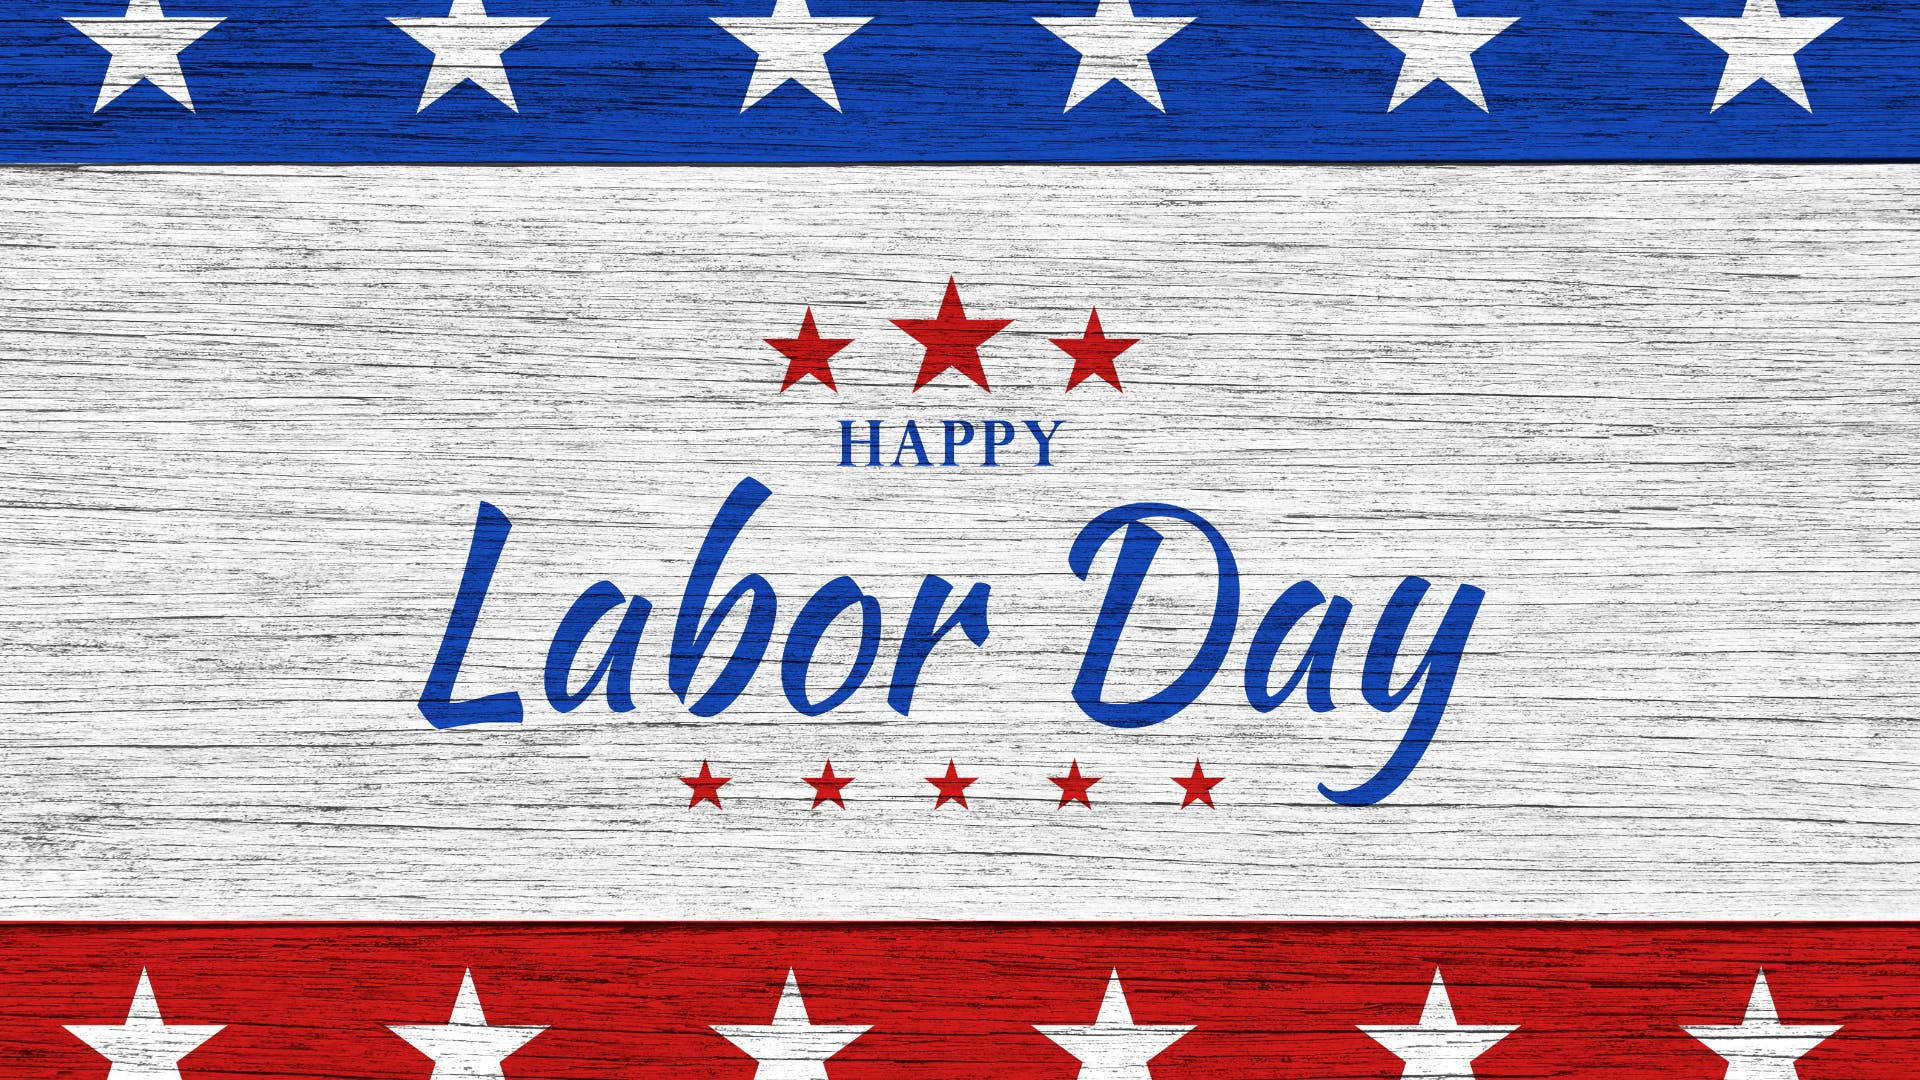 Labor Day Greetings On Wood Background